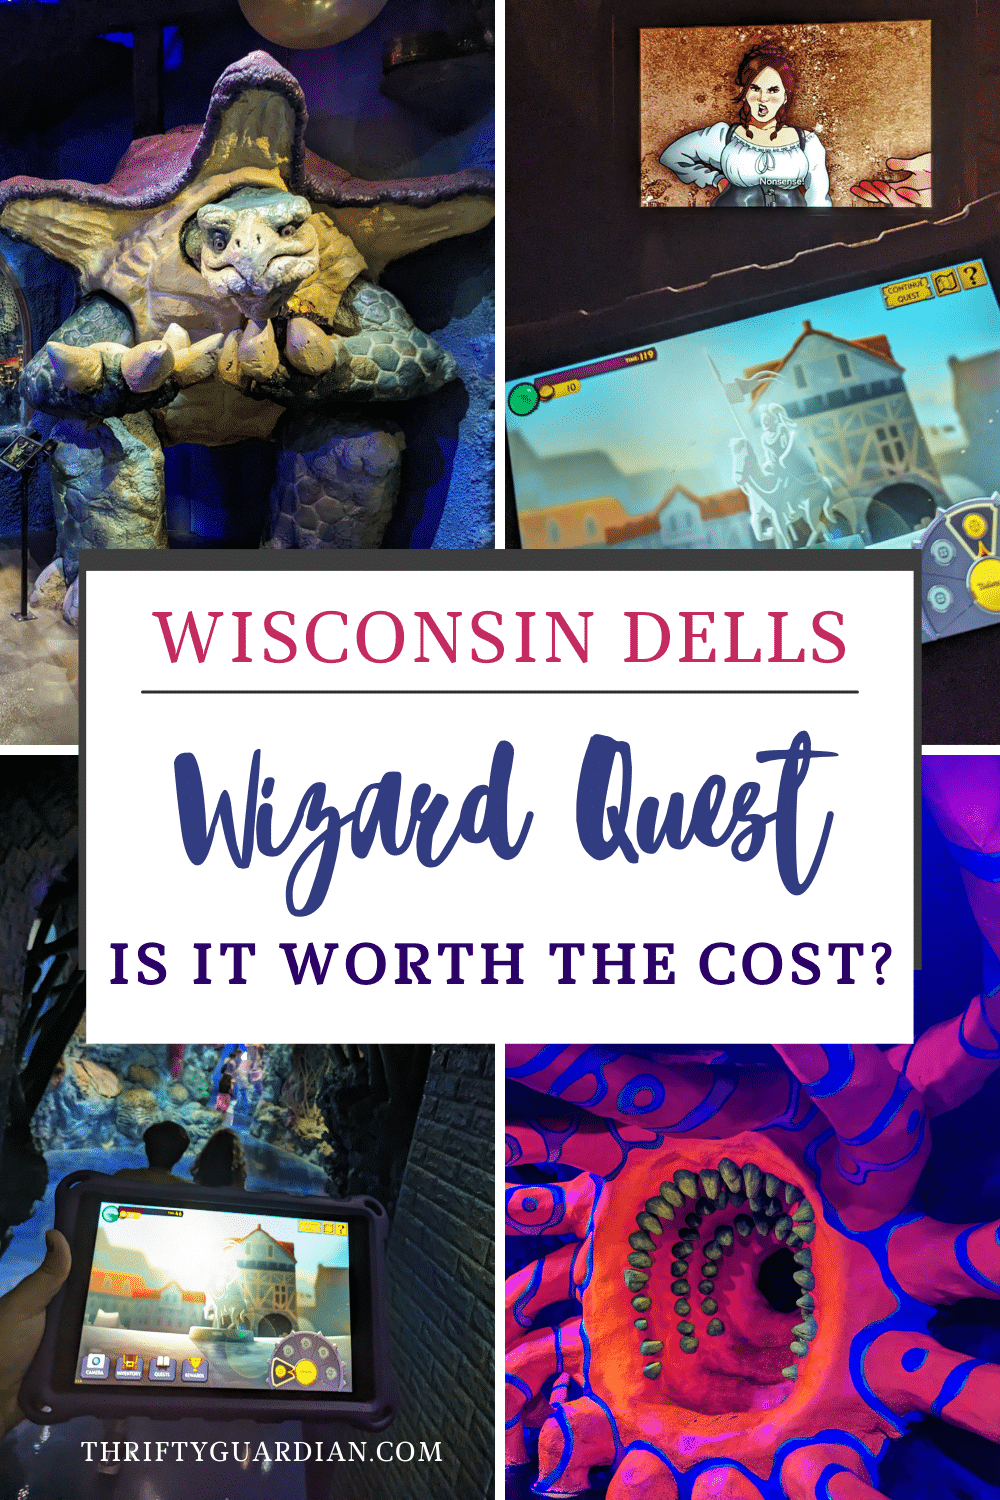 Wisconsin Dells Wizard Quest Review - is it worth the money?